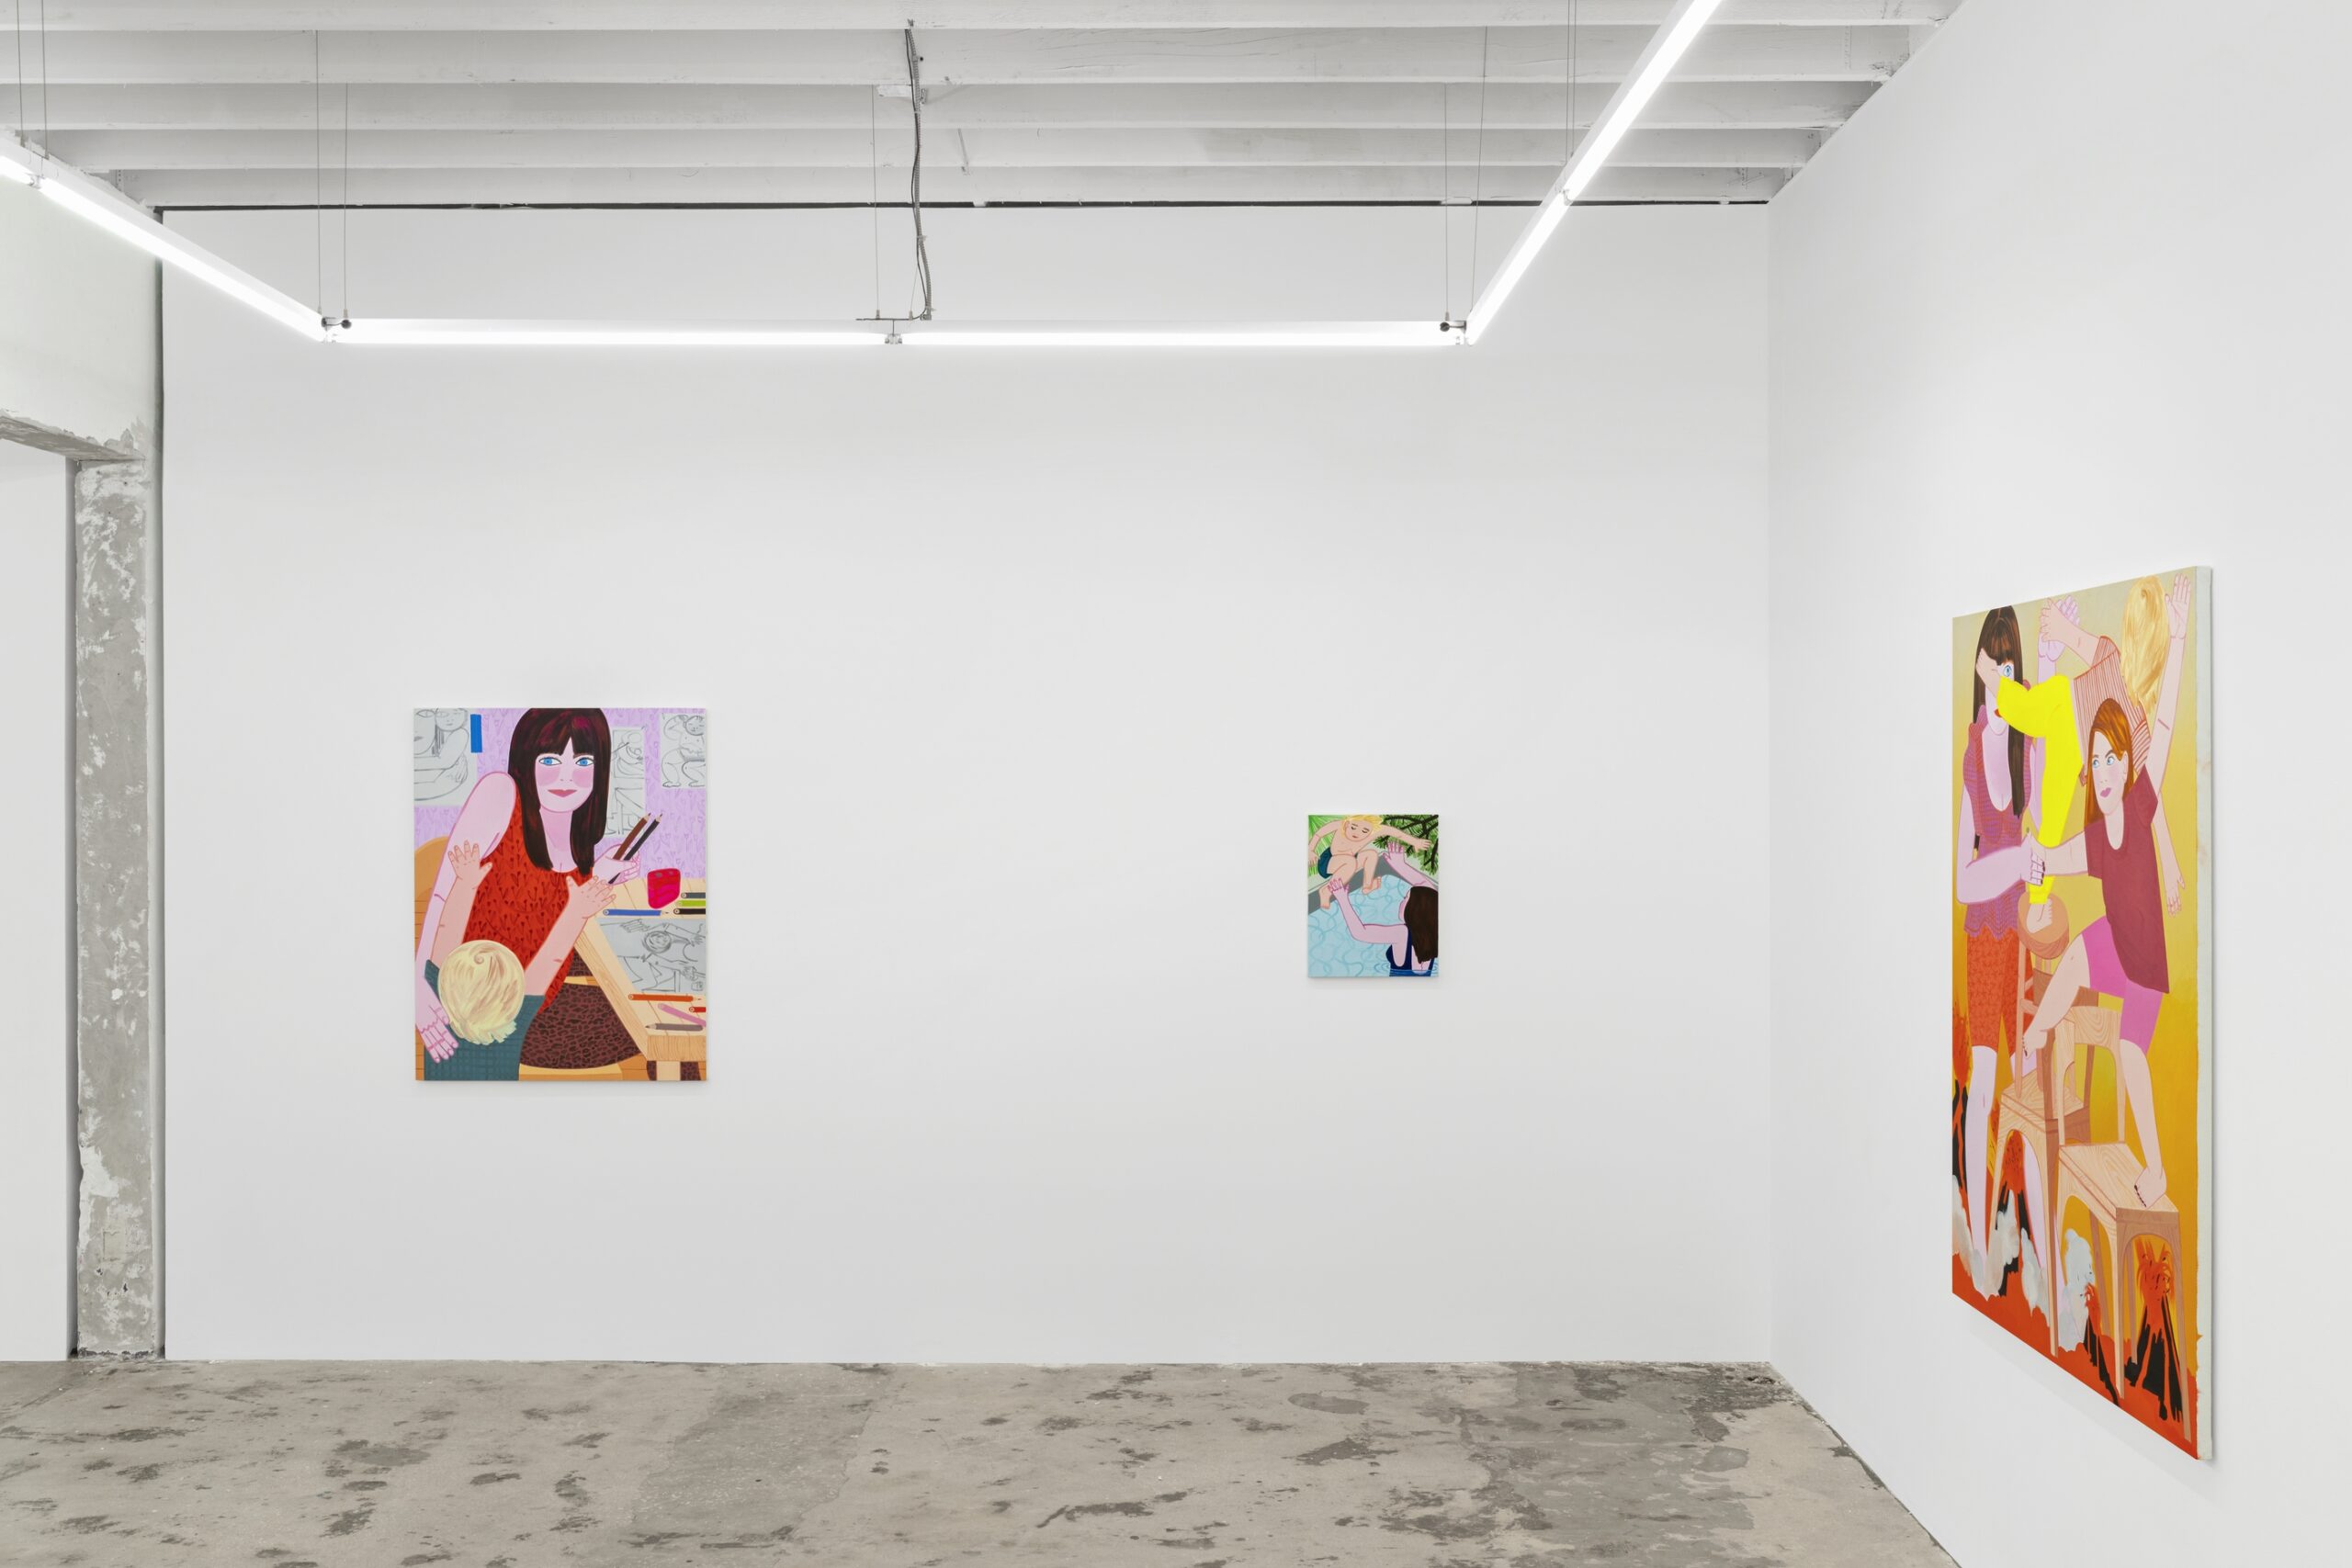 Installation view of Madeline Donahue: Present Tense on view in the Front Gallery. Photographed are oil on canvas paintings titled "Amorini at the Table," "Jump," and "Floor is Lava."